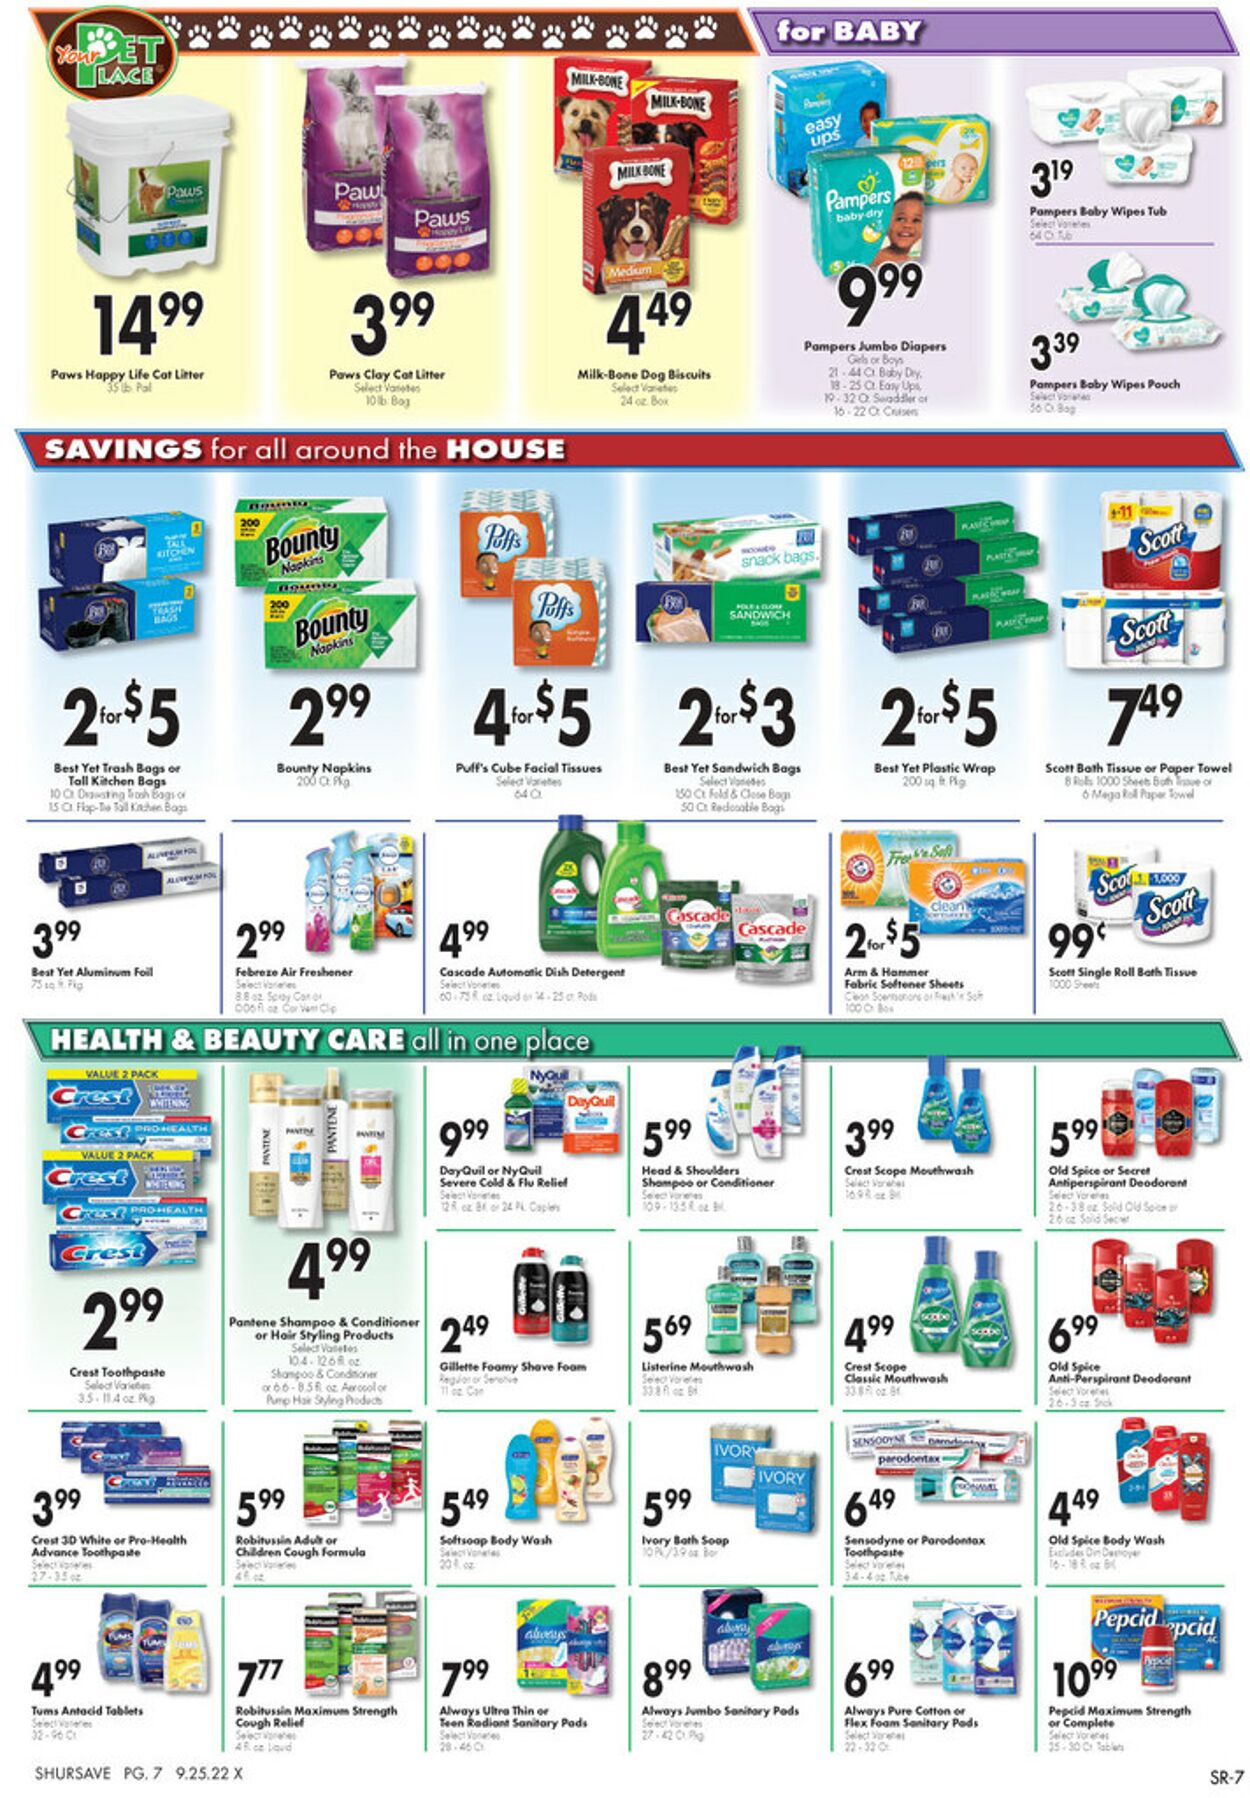 Gerrity's Supermarkets Ad from 09/26/2022